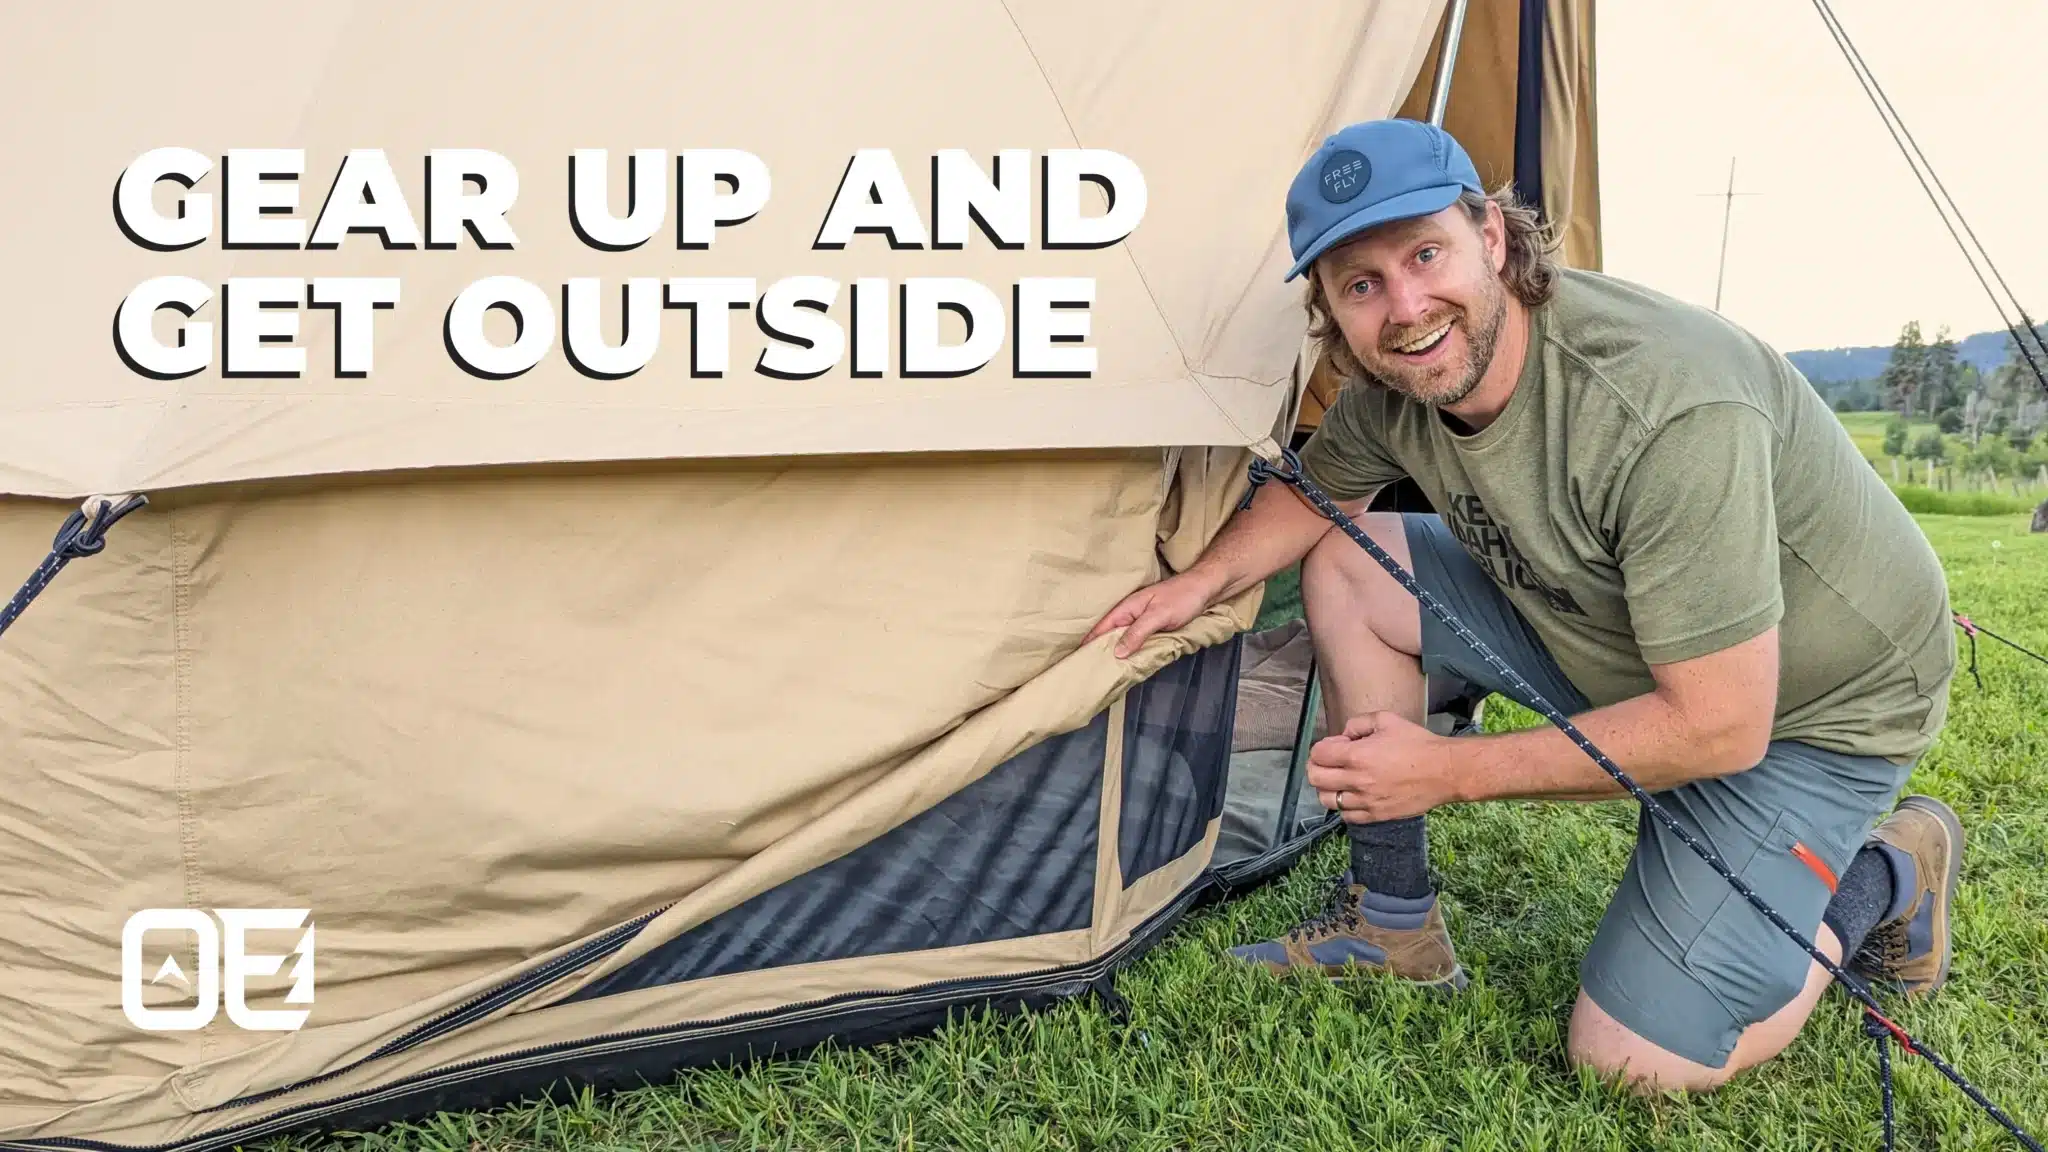 Chase fly doing one of his outdoor gear reviews with excited expression kneeling next to tent with words gear up and get outside on image